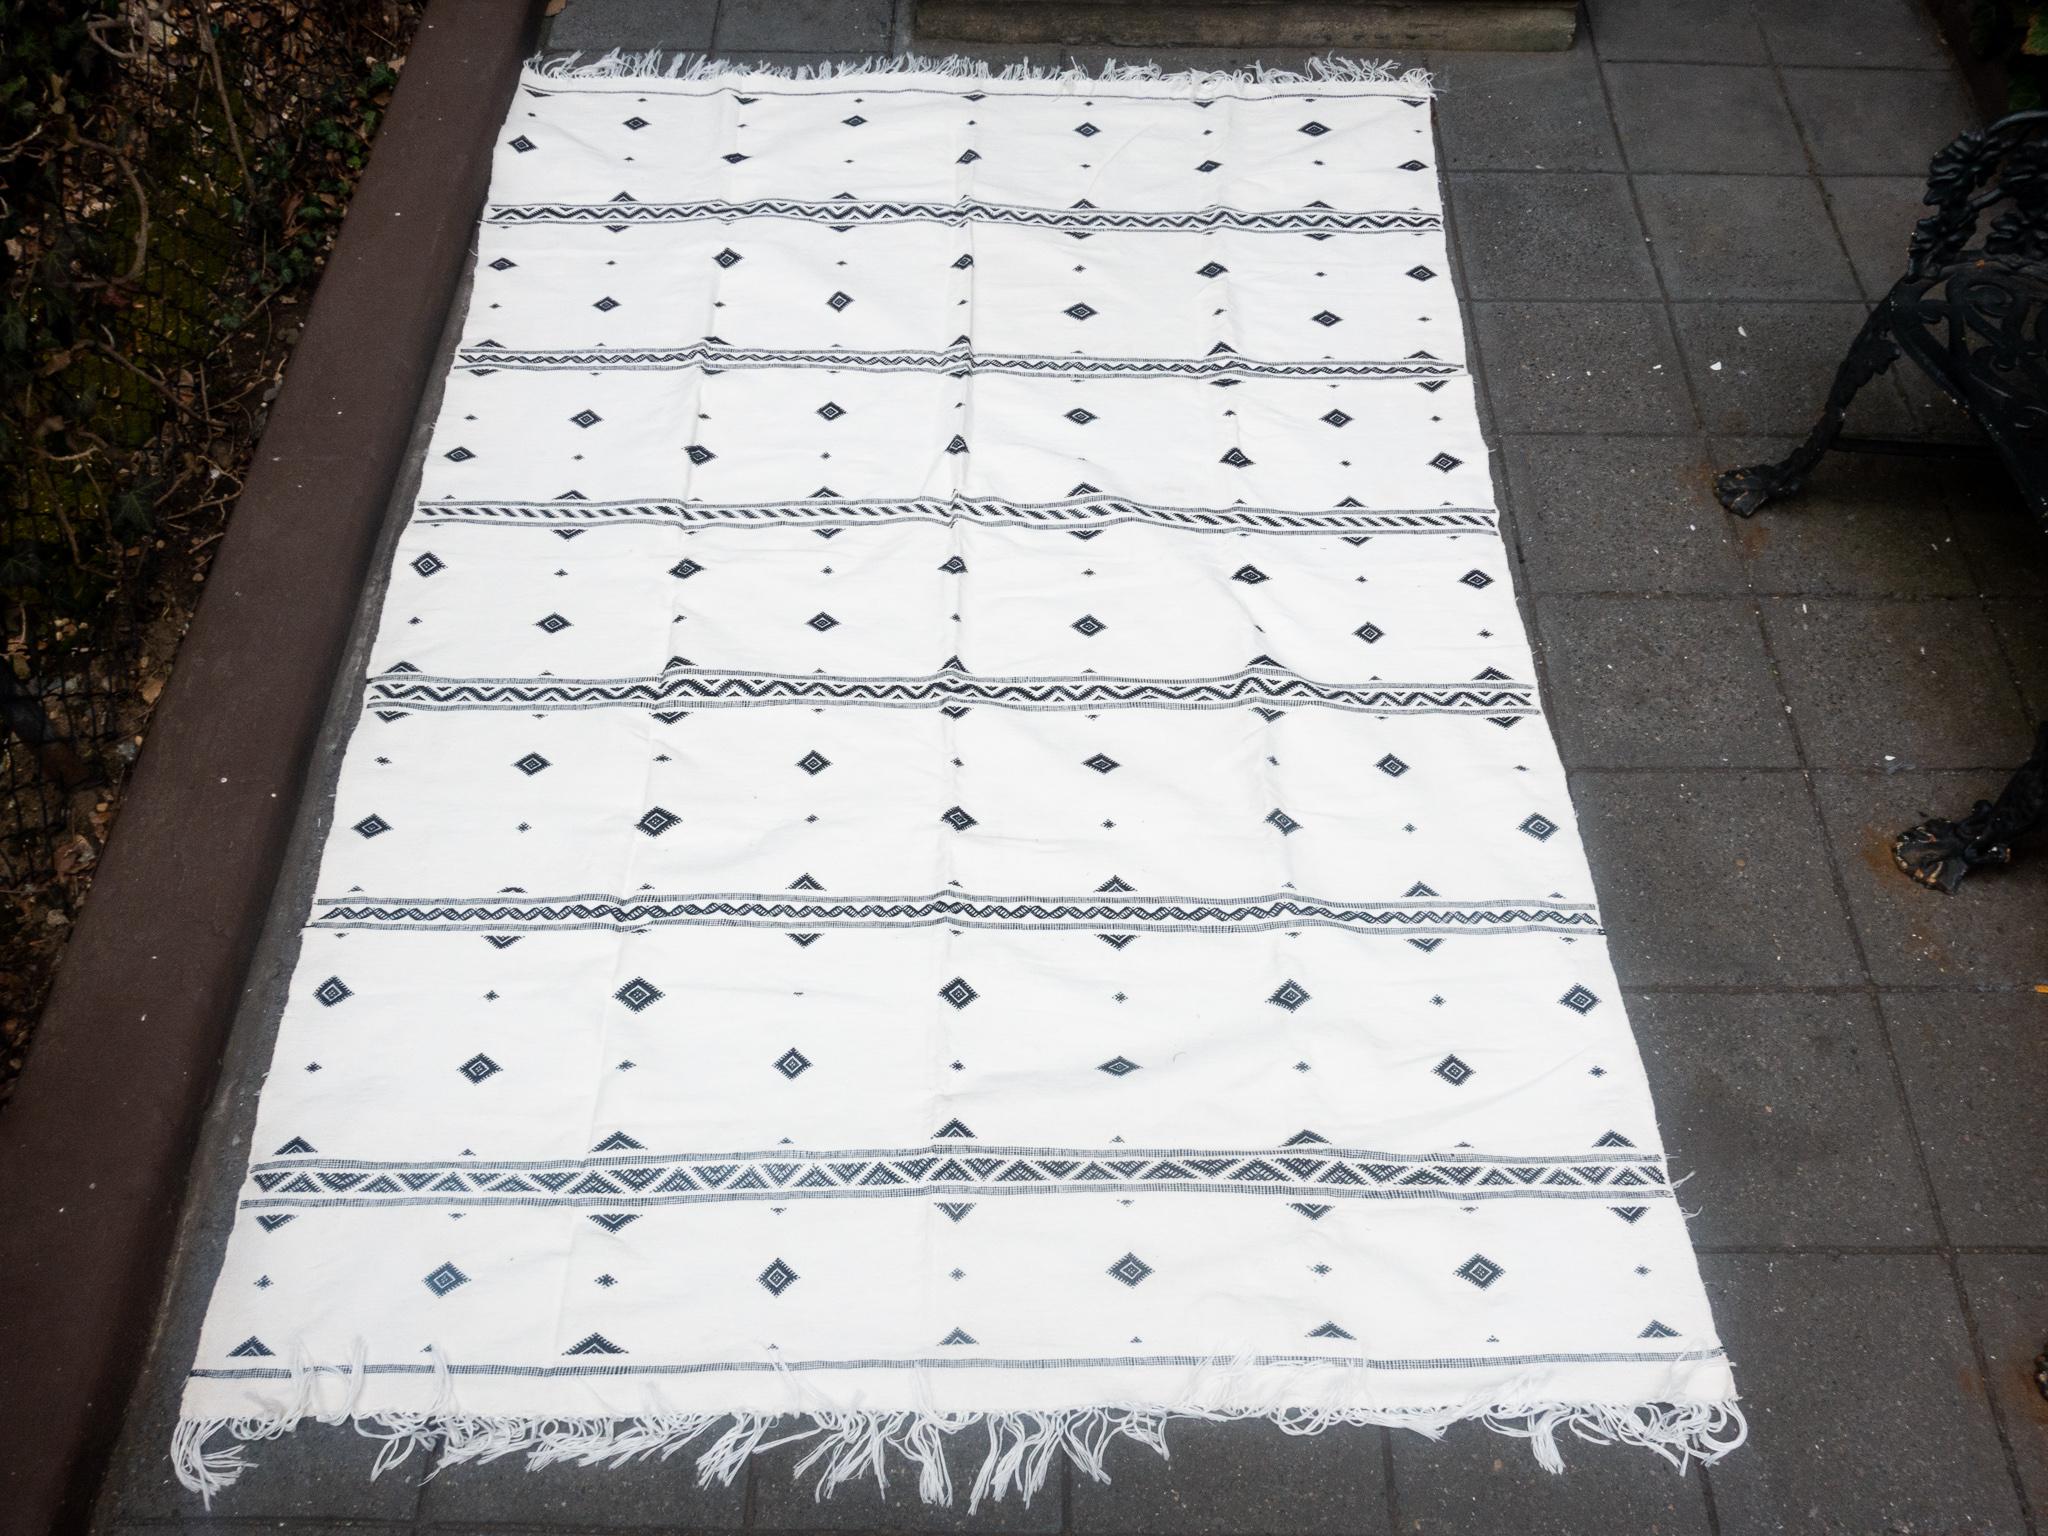 Black and white cotton woven rug from Tangier, Morocco.